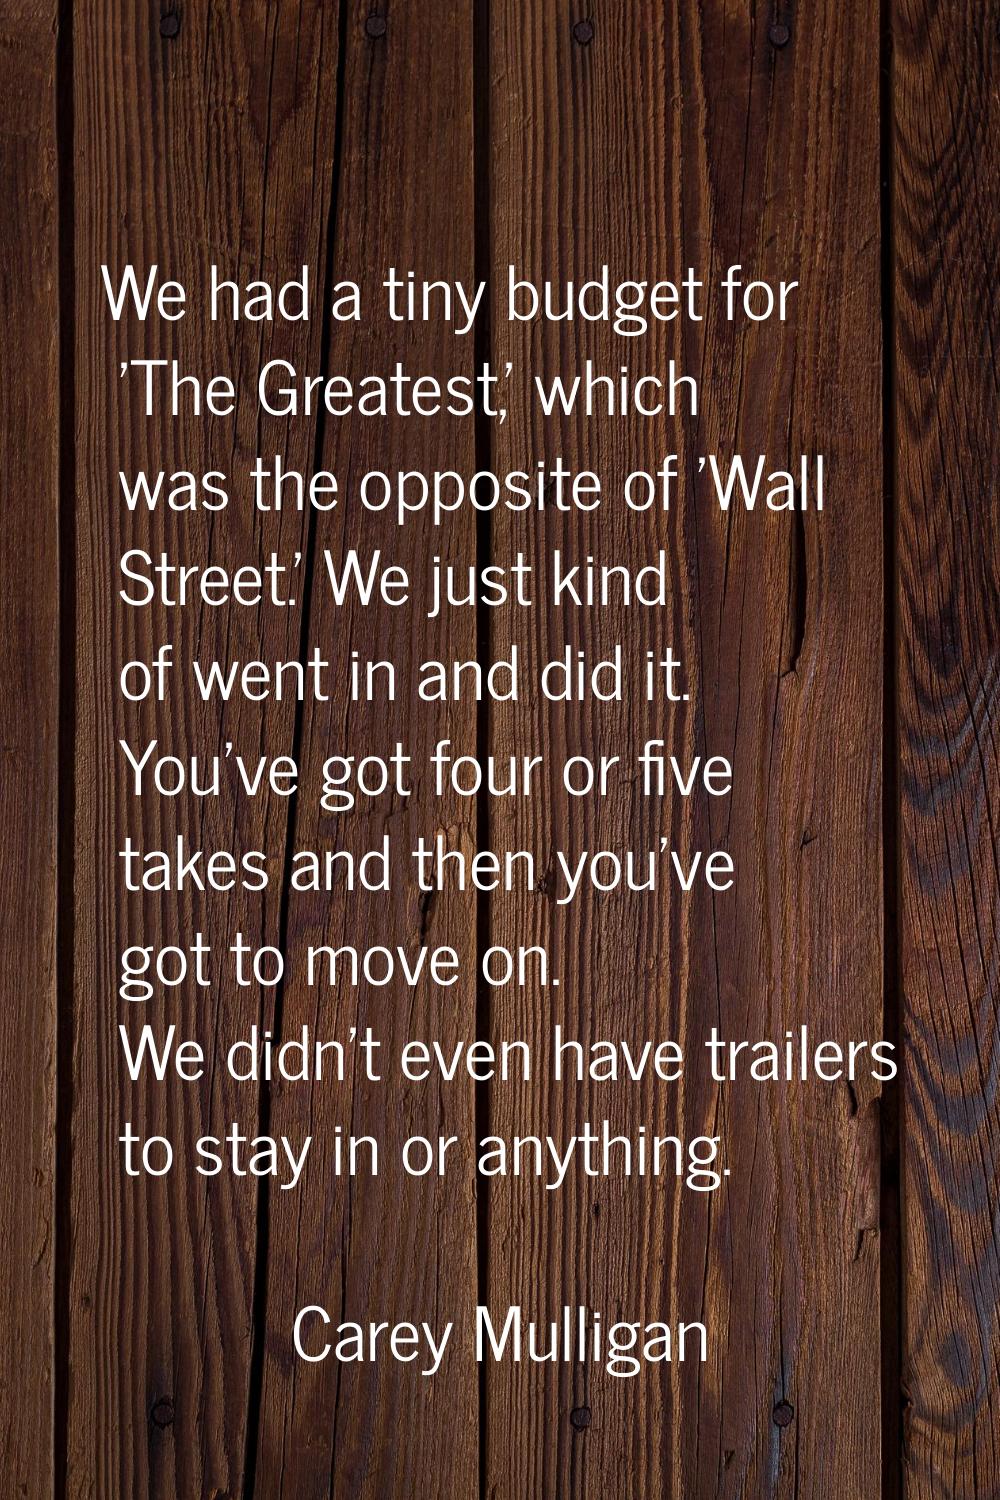 We had a tiny budget for 'The Greatest,' which was the opposite of 'Wall Street.' We just kind of w